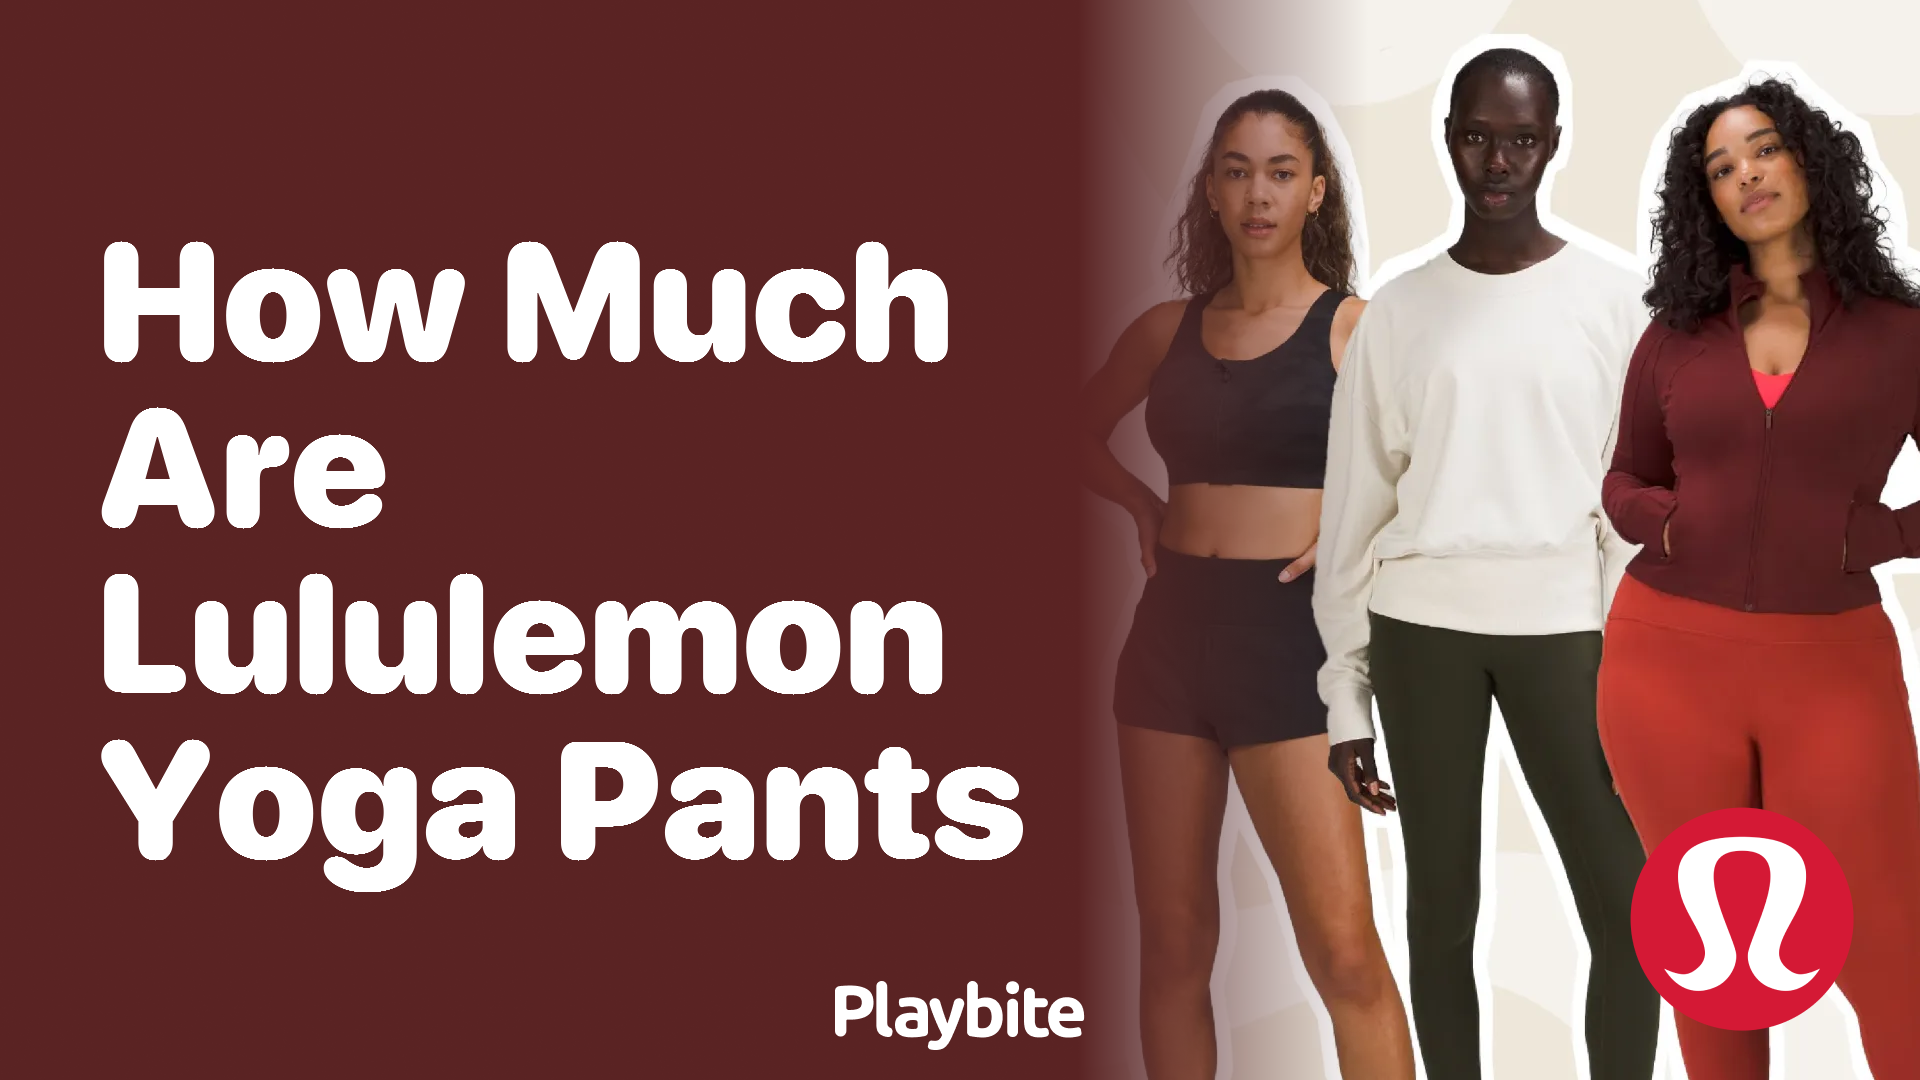 How Much Do Lululemon Yoga Pants Cost? - Playbite